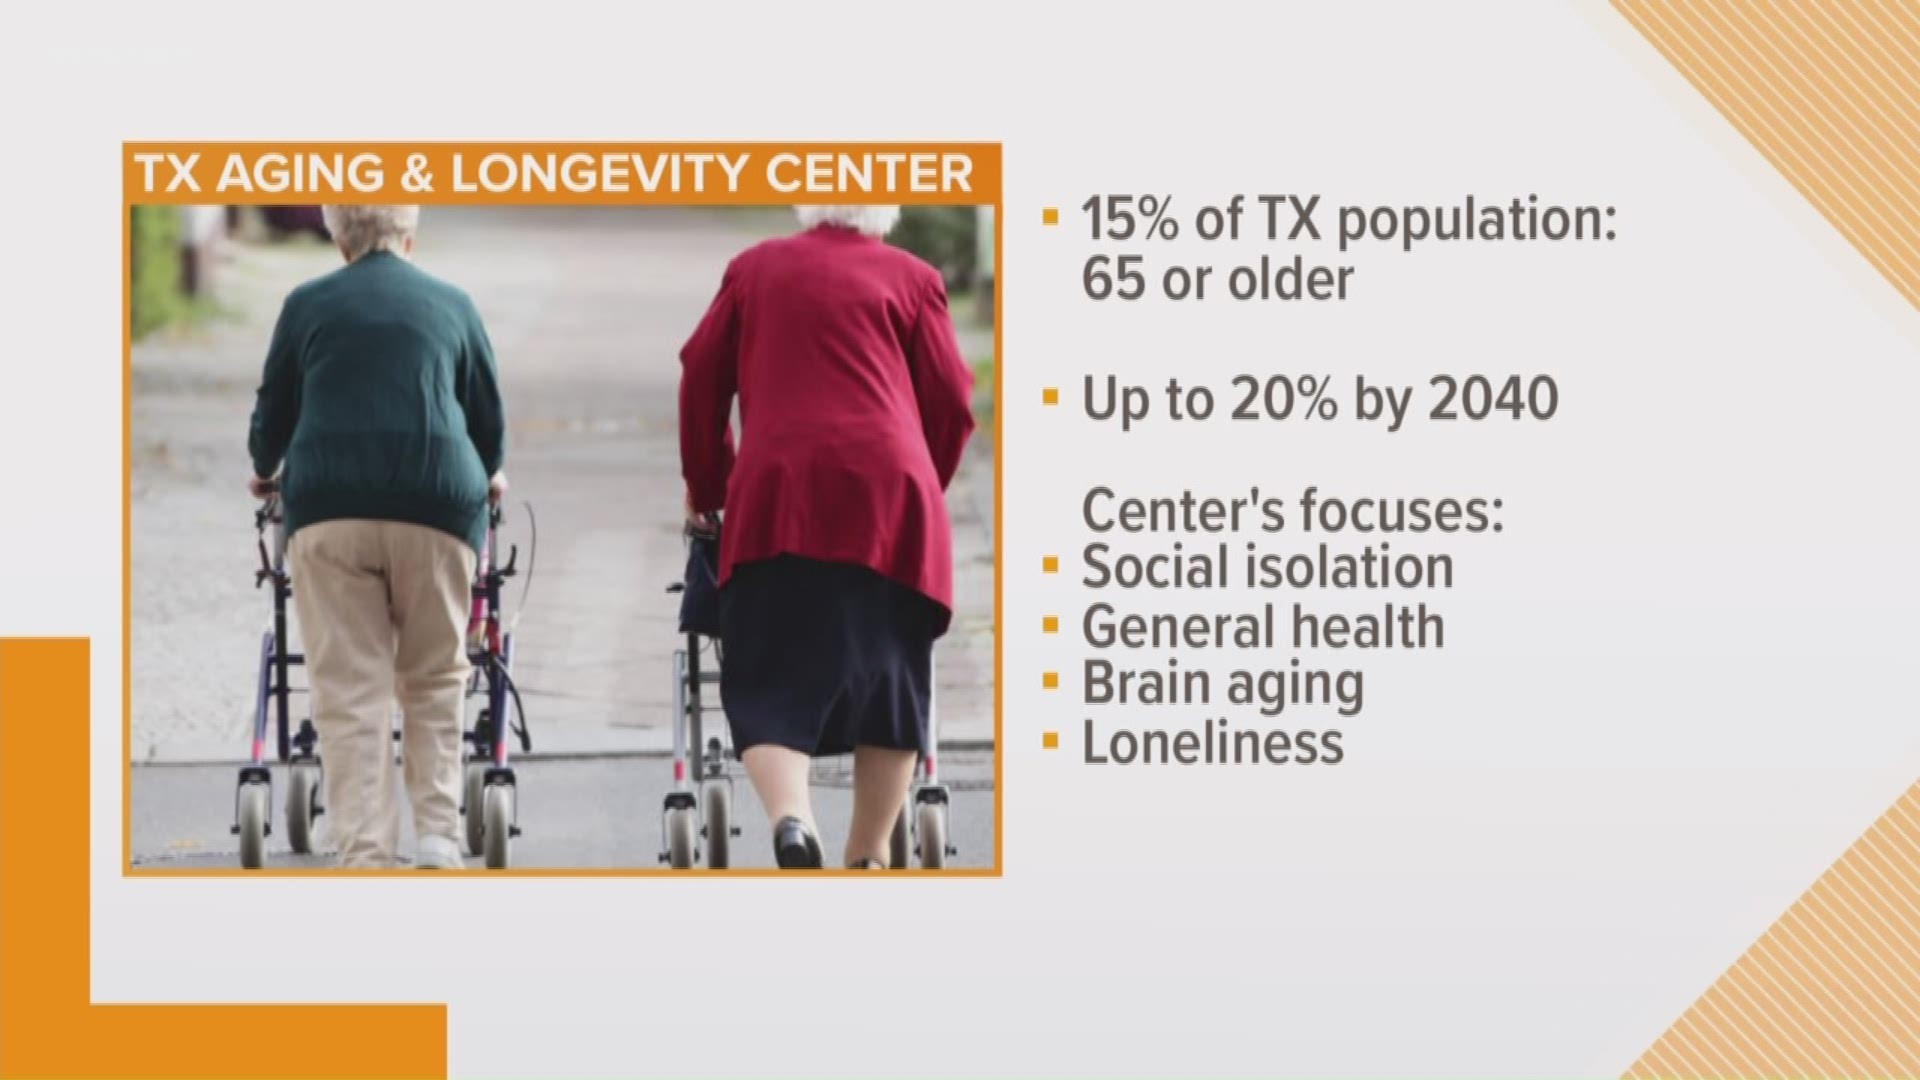 The University of Texas is launching a new facility called the "Texas Aging and Longevity Center."